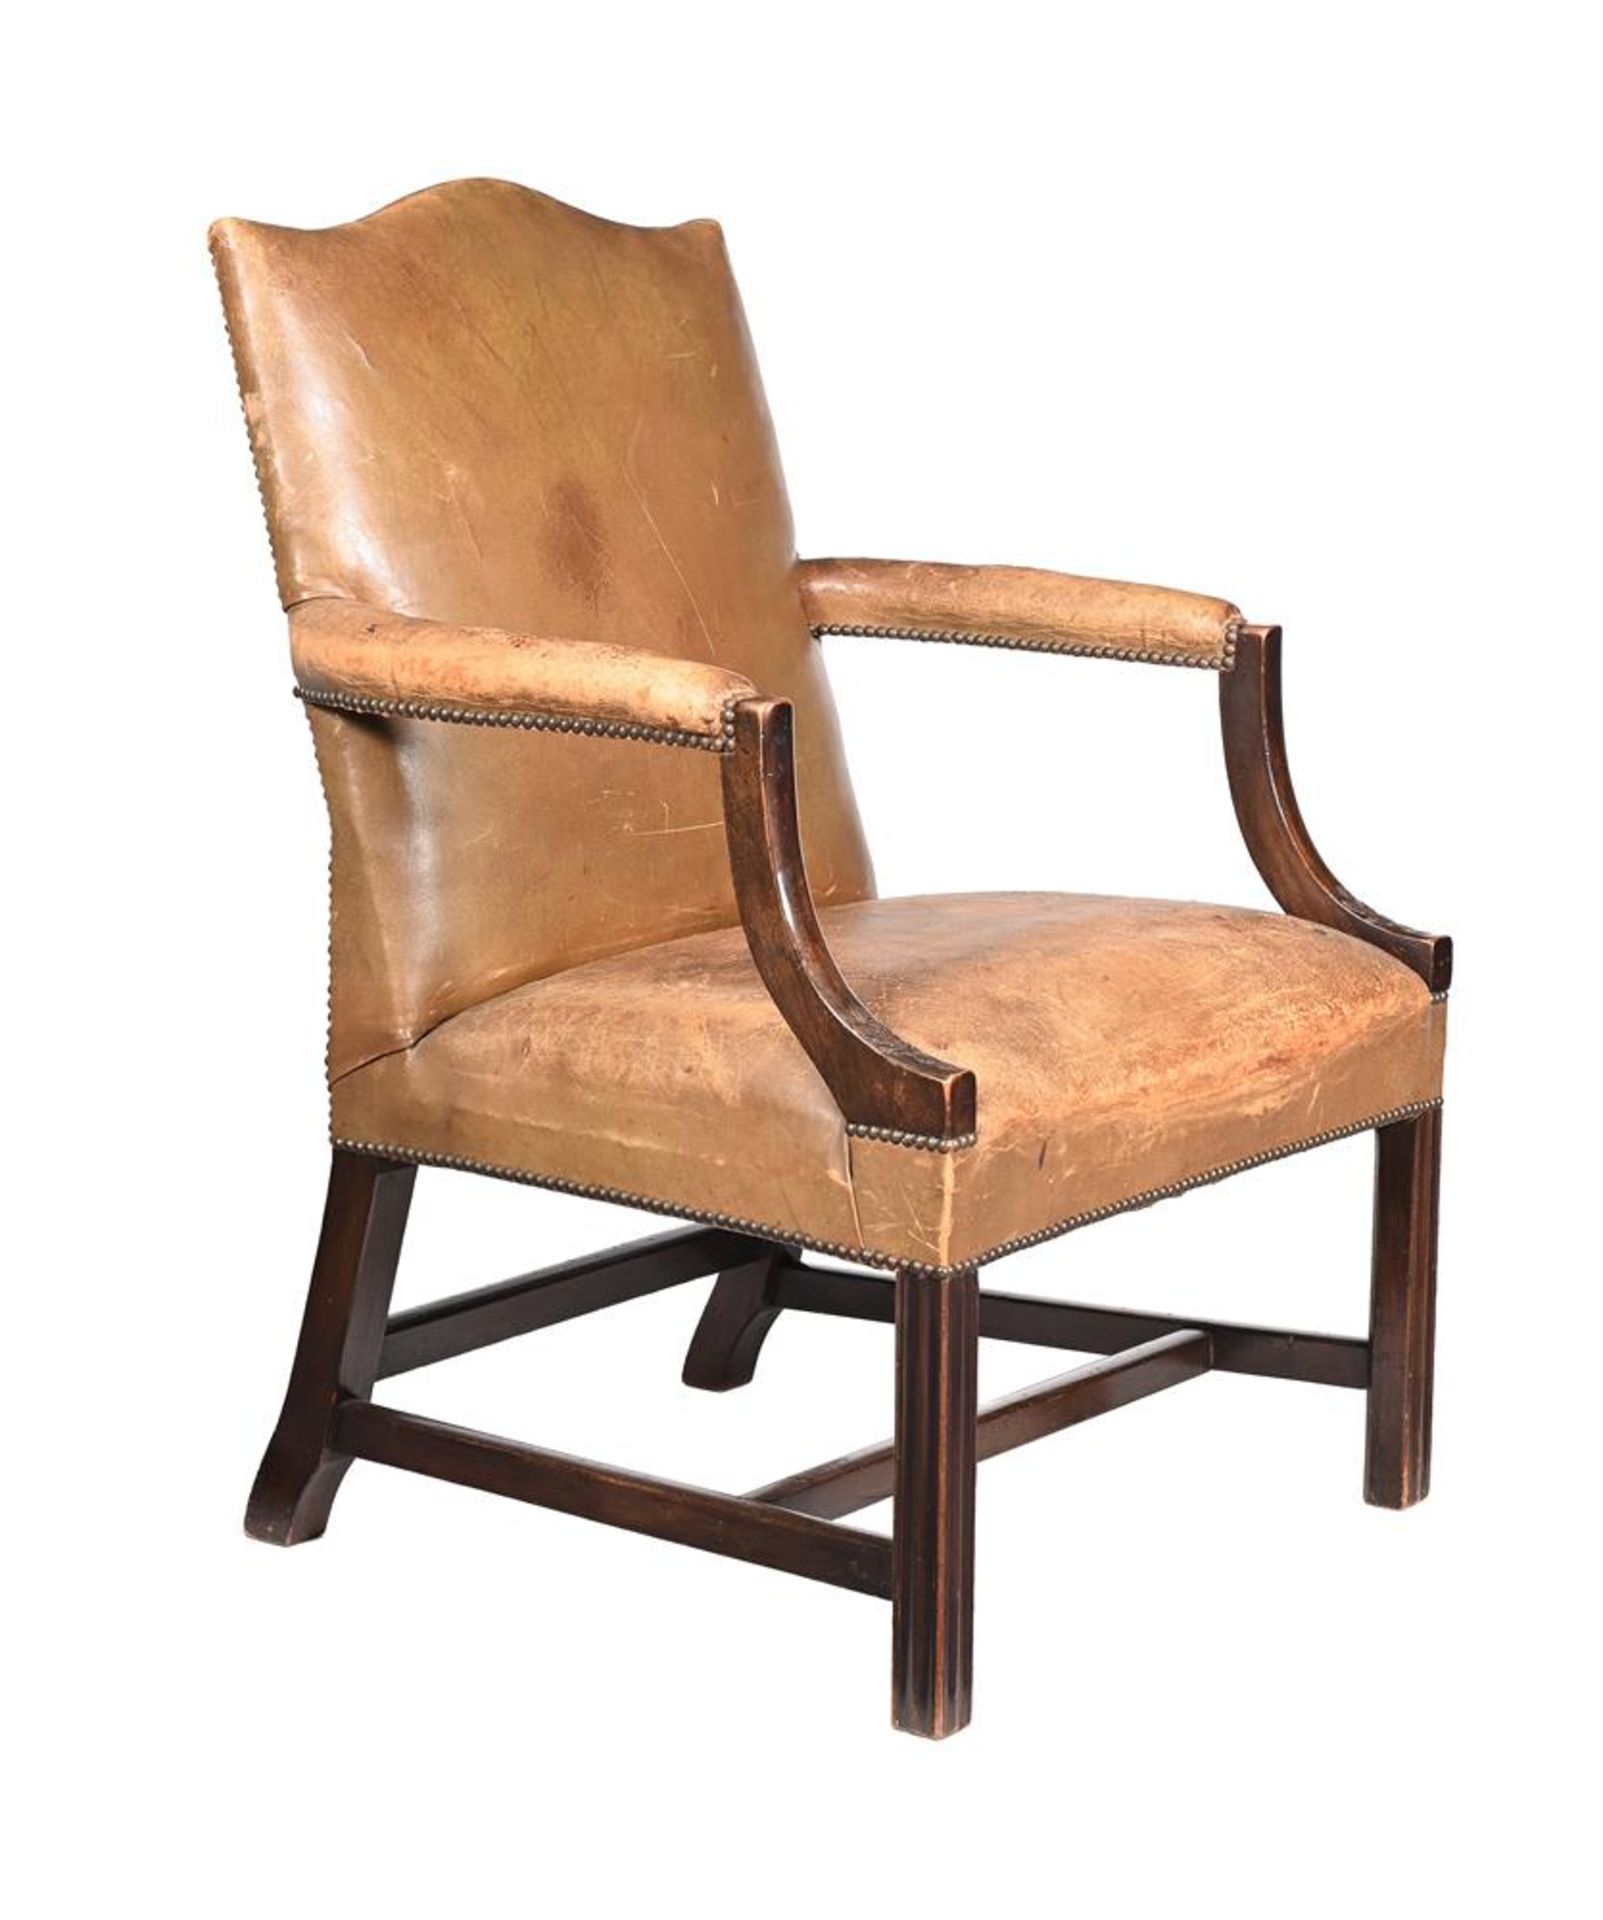 A GEORGE III MAHOGANY AND LEATHER UPHOLSTERED OPEN ARMCHAIR - Image 2 of 3